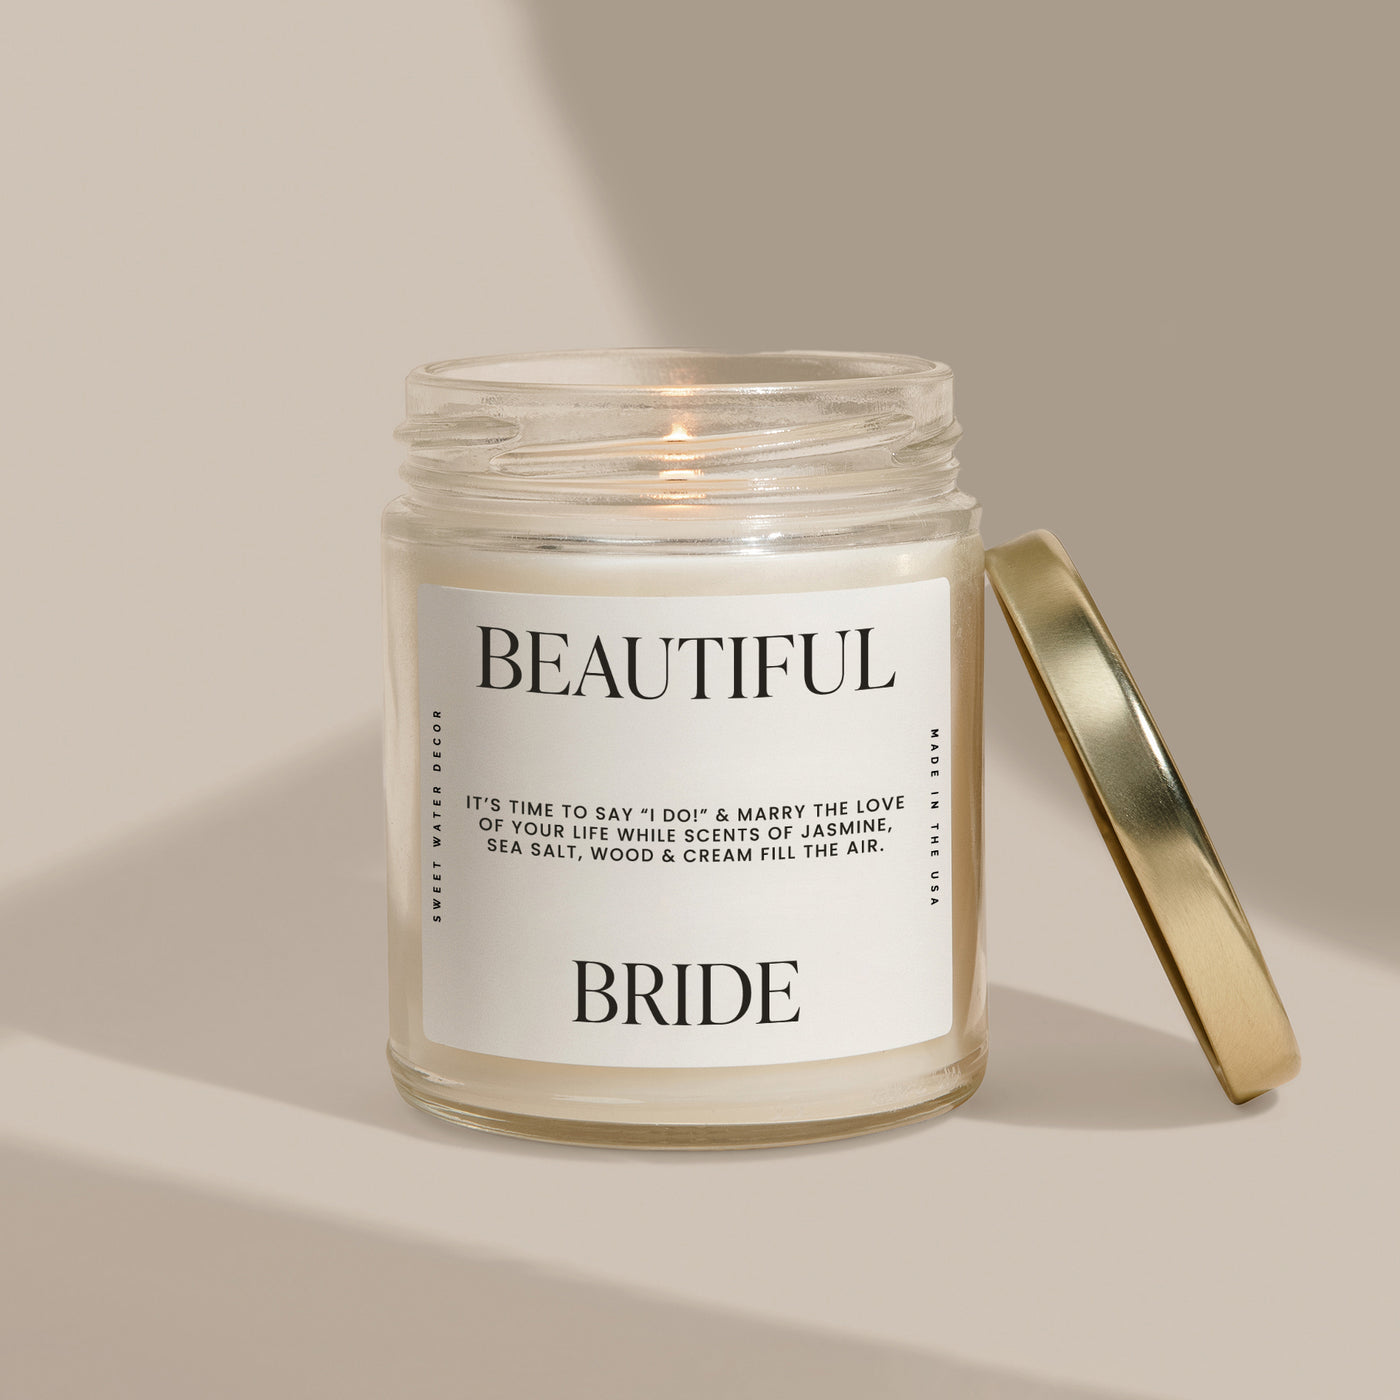 Beautiful Bride Soy Candle - Large Quote Label - 9 oz - Sweet Water Decor - Candles